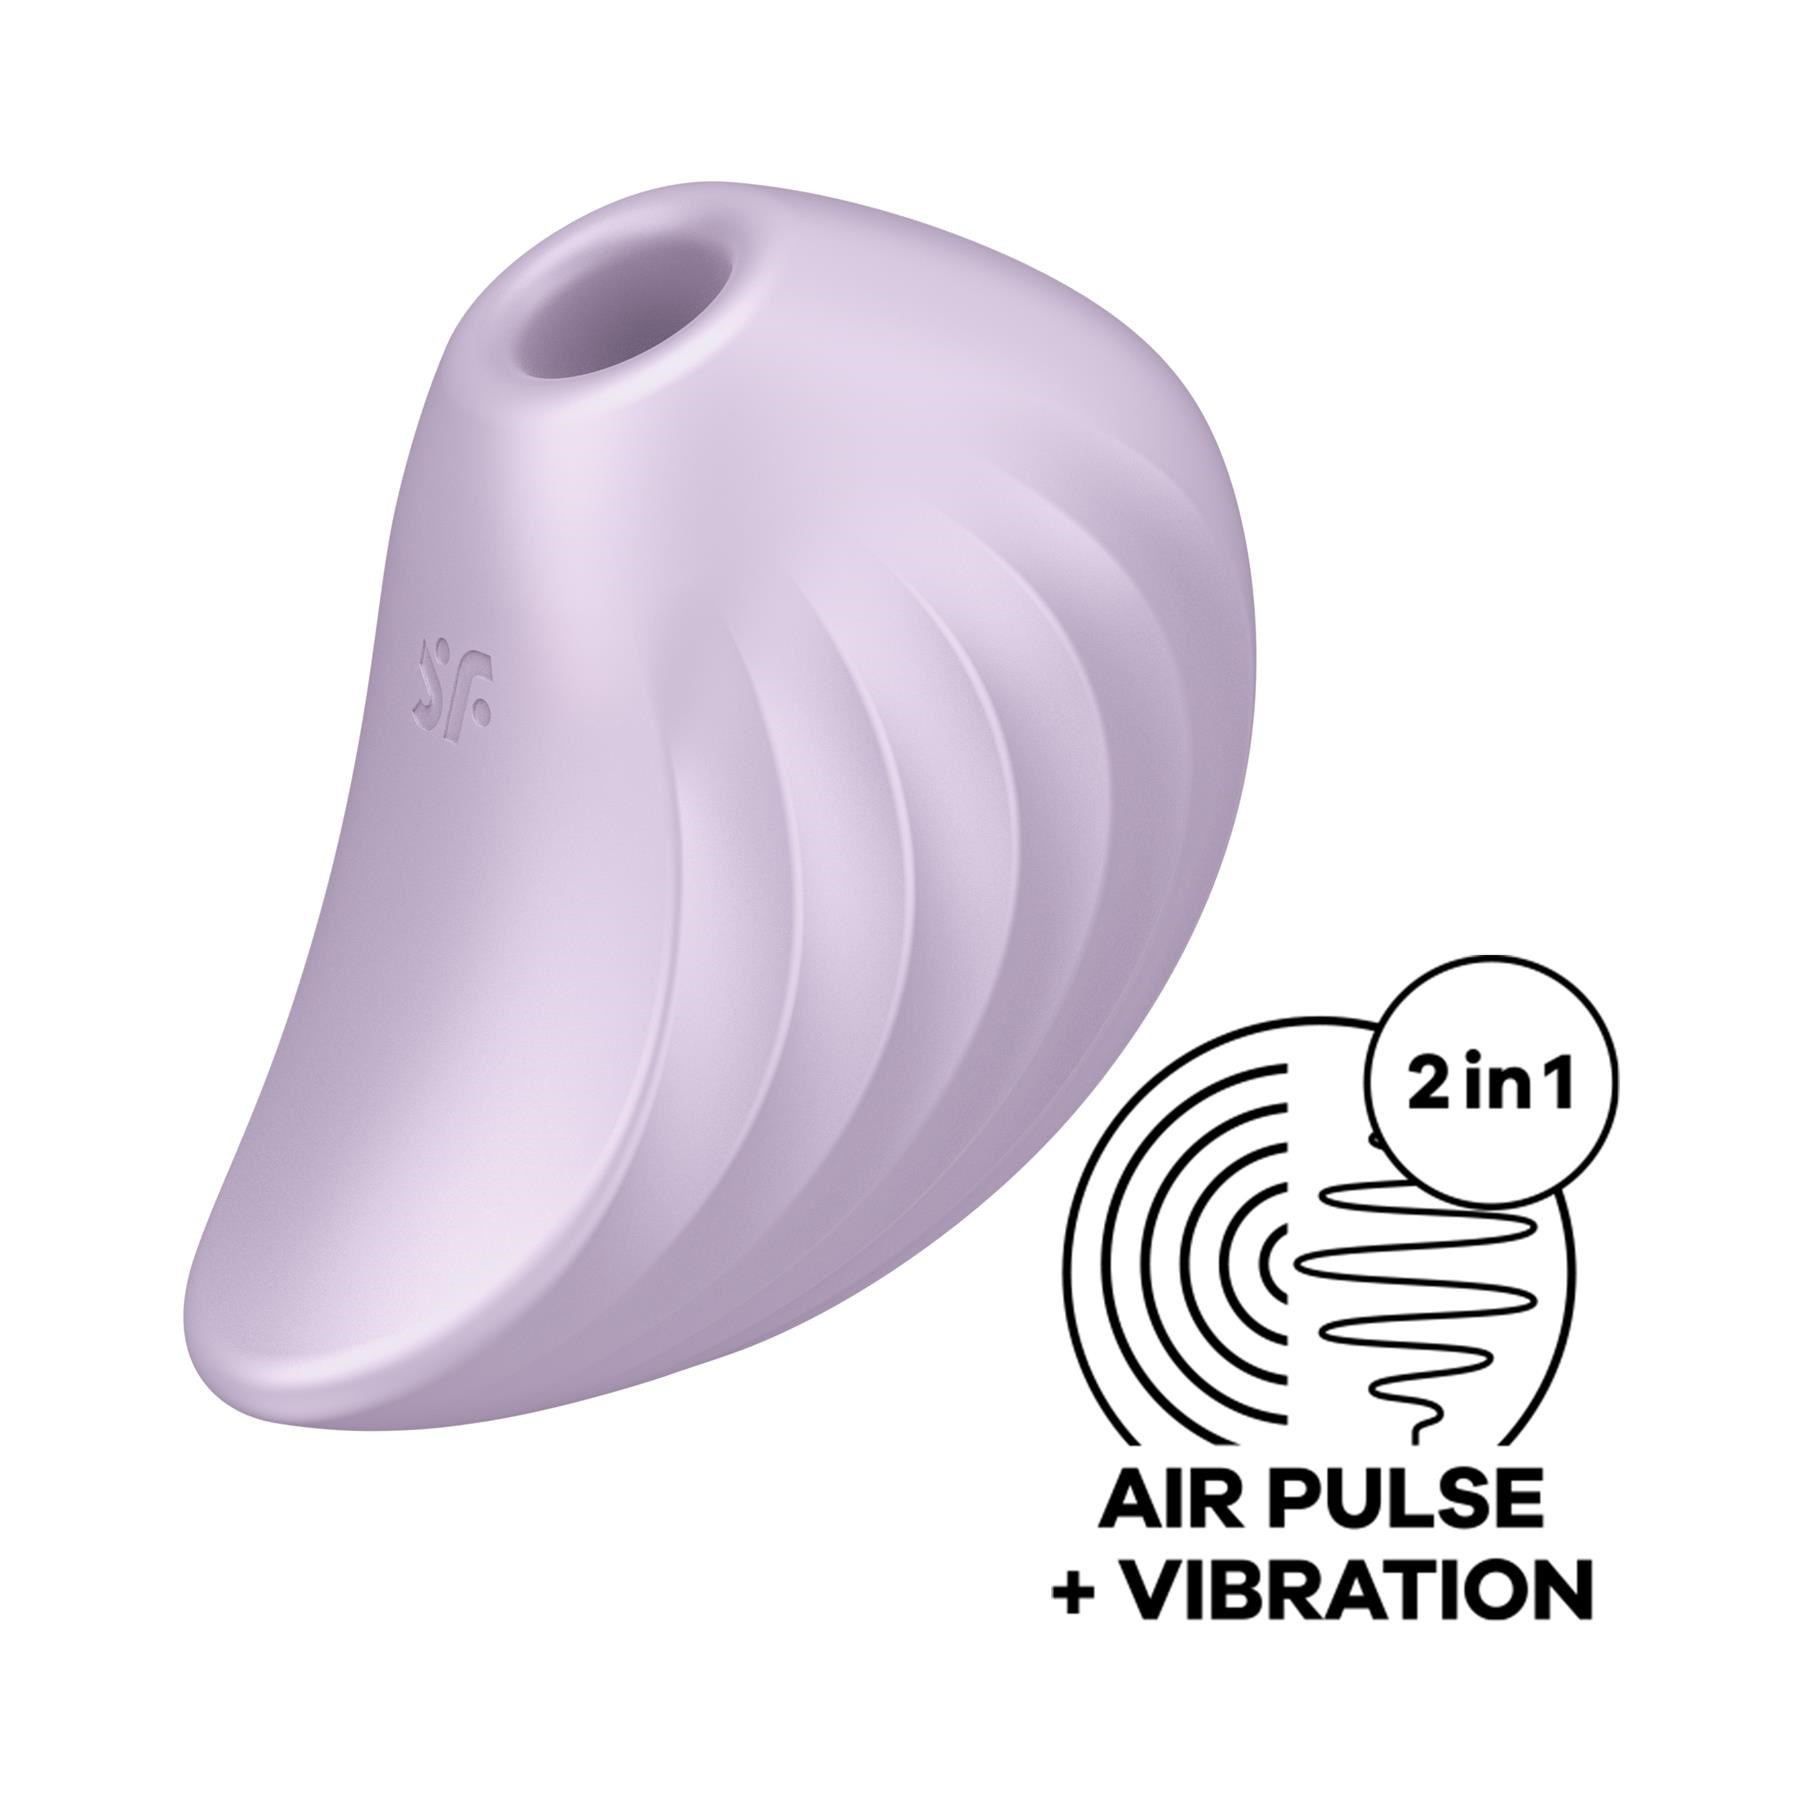 Satisfyer Pearl Diver Air Pulse Clitoral Stimulator - Product Shot #6 - With Air Pulse Icon